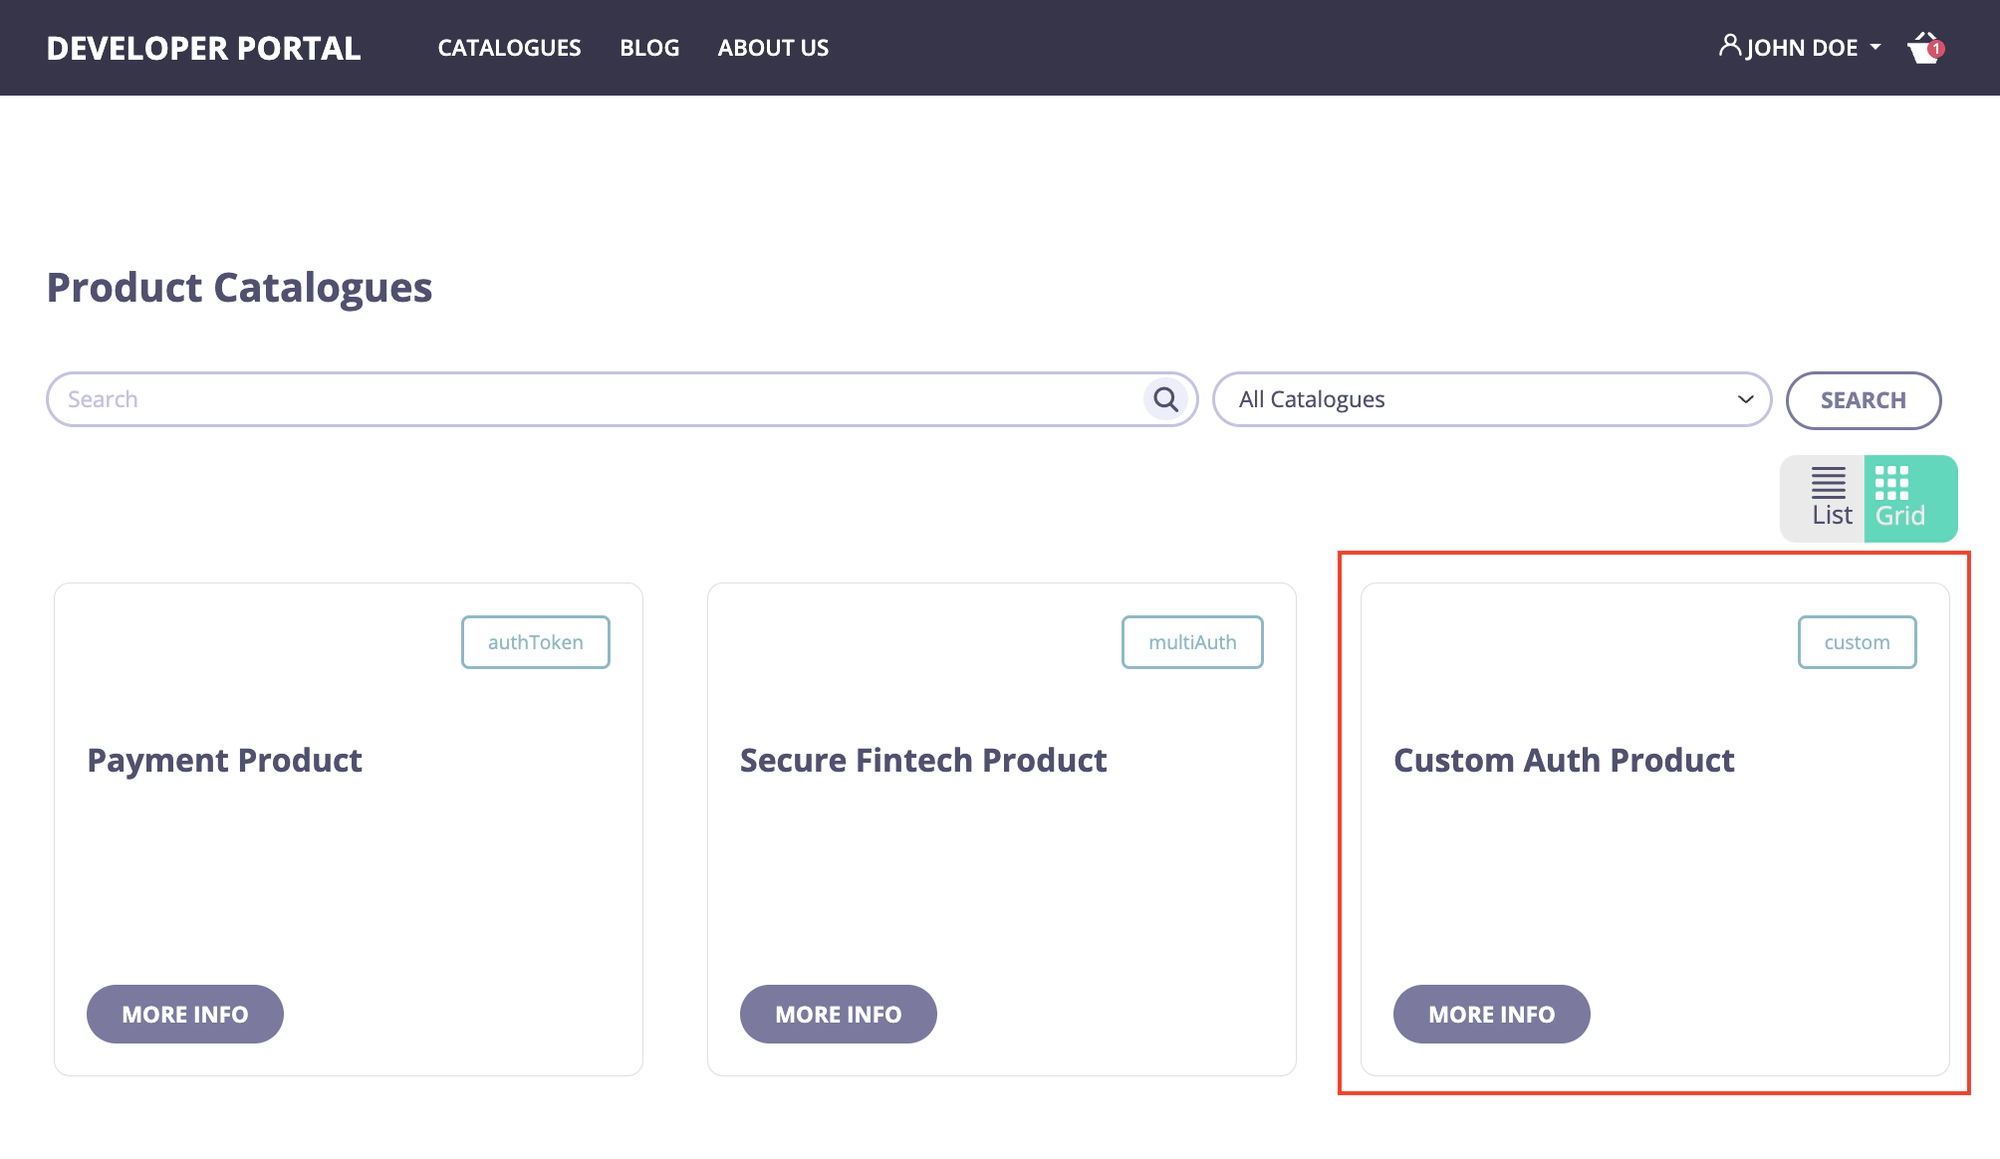 Custom auth API Product is published in the portal